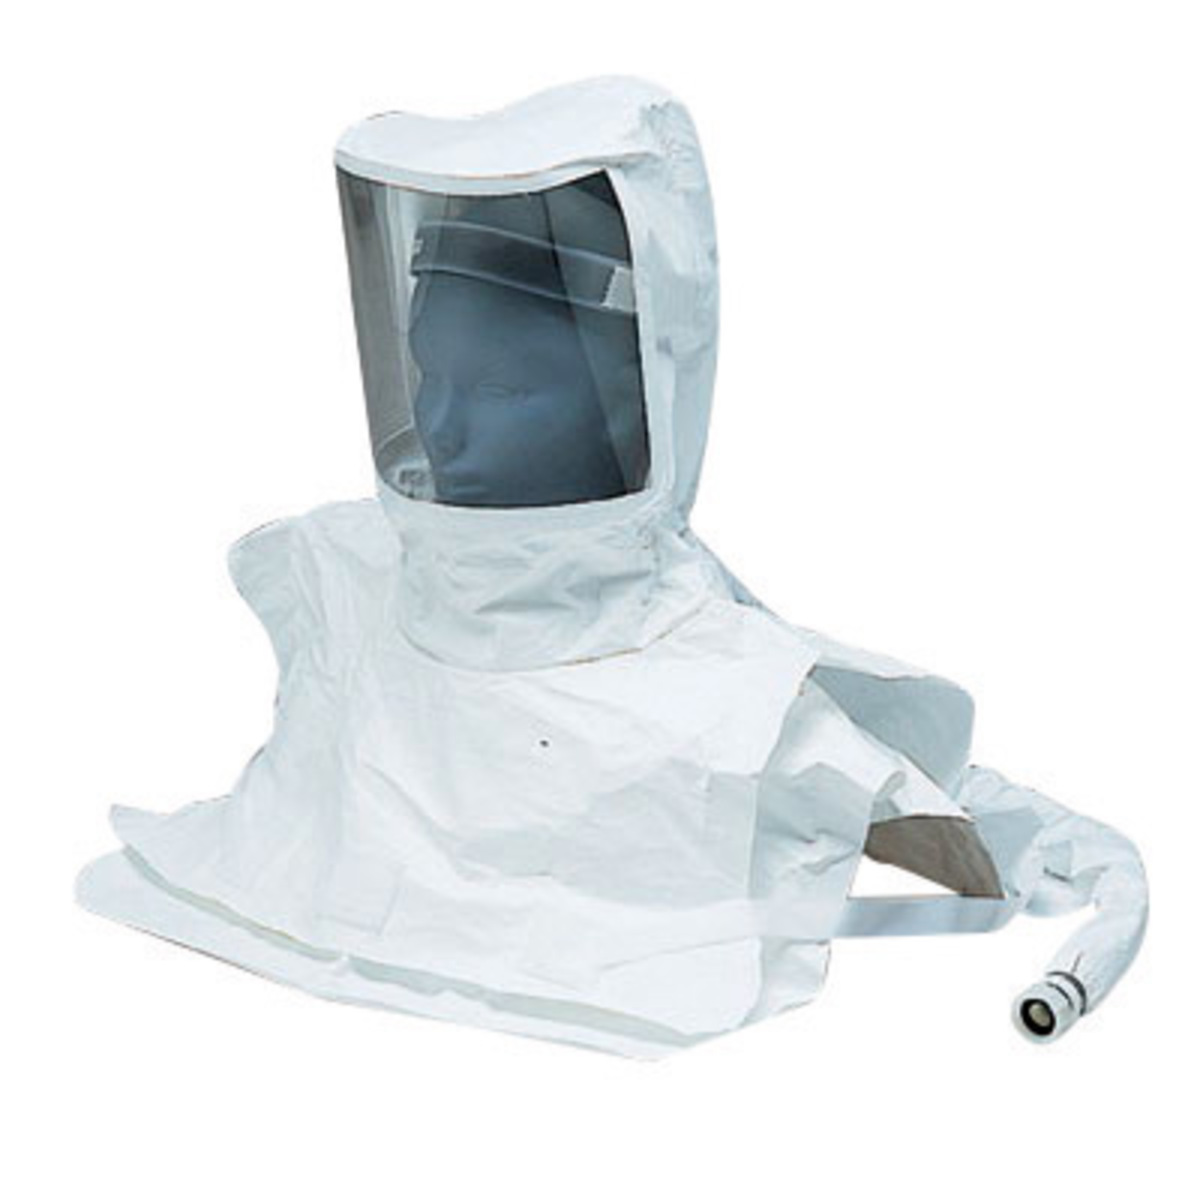 Allegro® Tyvek® Double Bib Maintenance Free Hood For Ambient Air Pumps (Availability restrictions apply.)